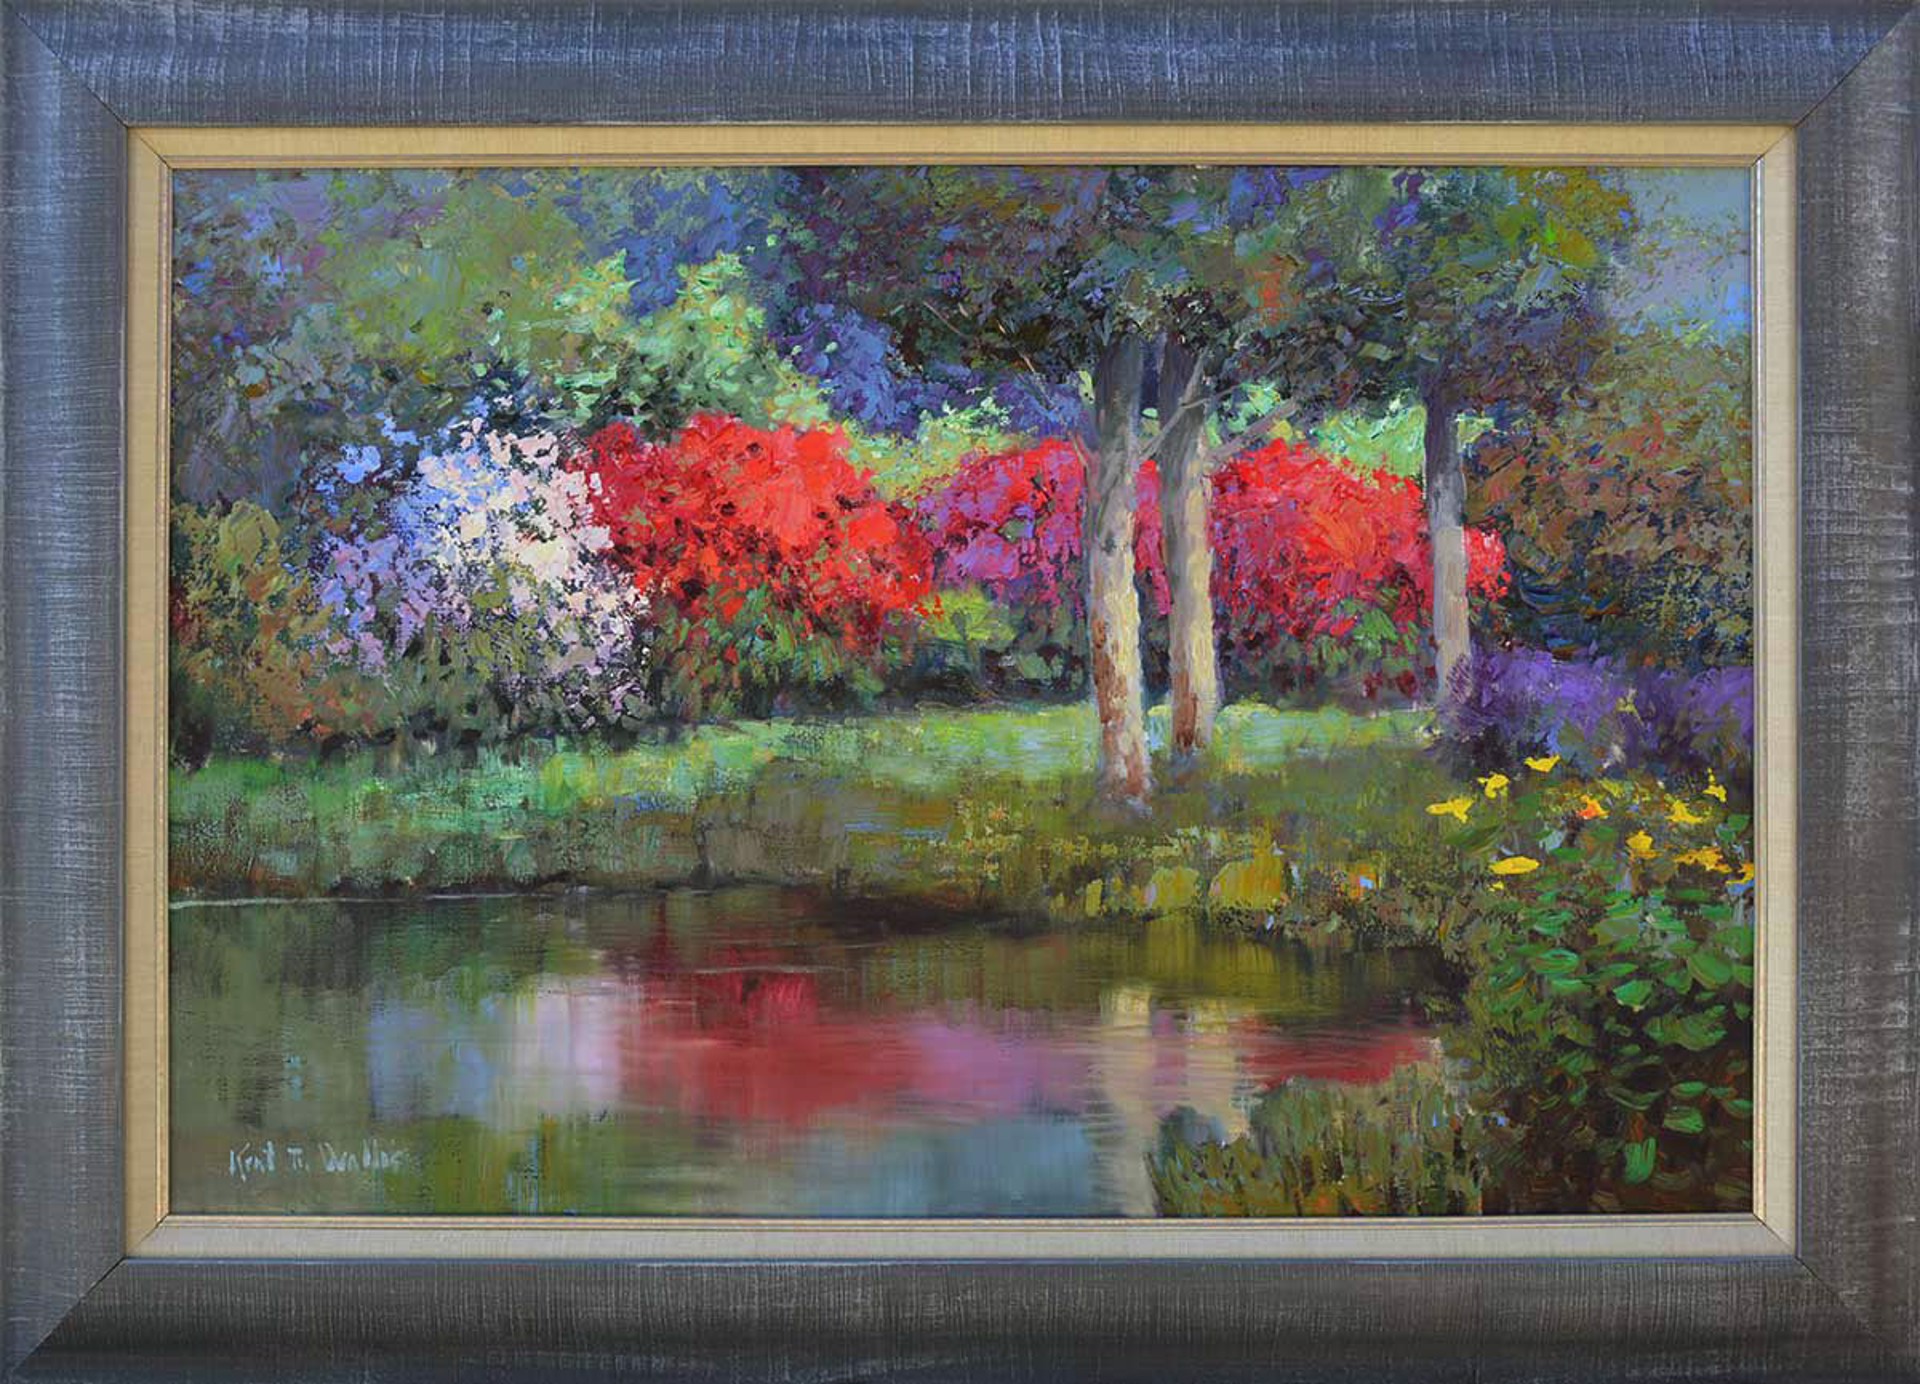 Kent Wallis, Reflective Color by Secondary Offerings